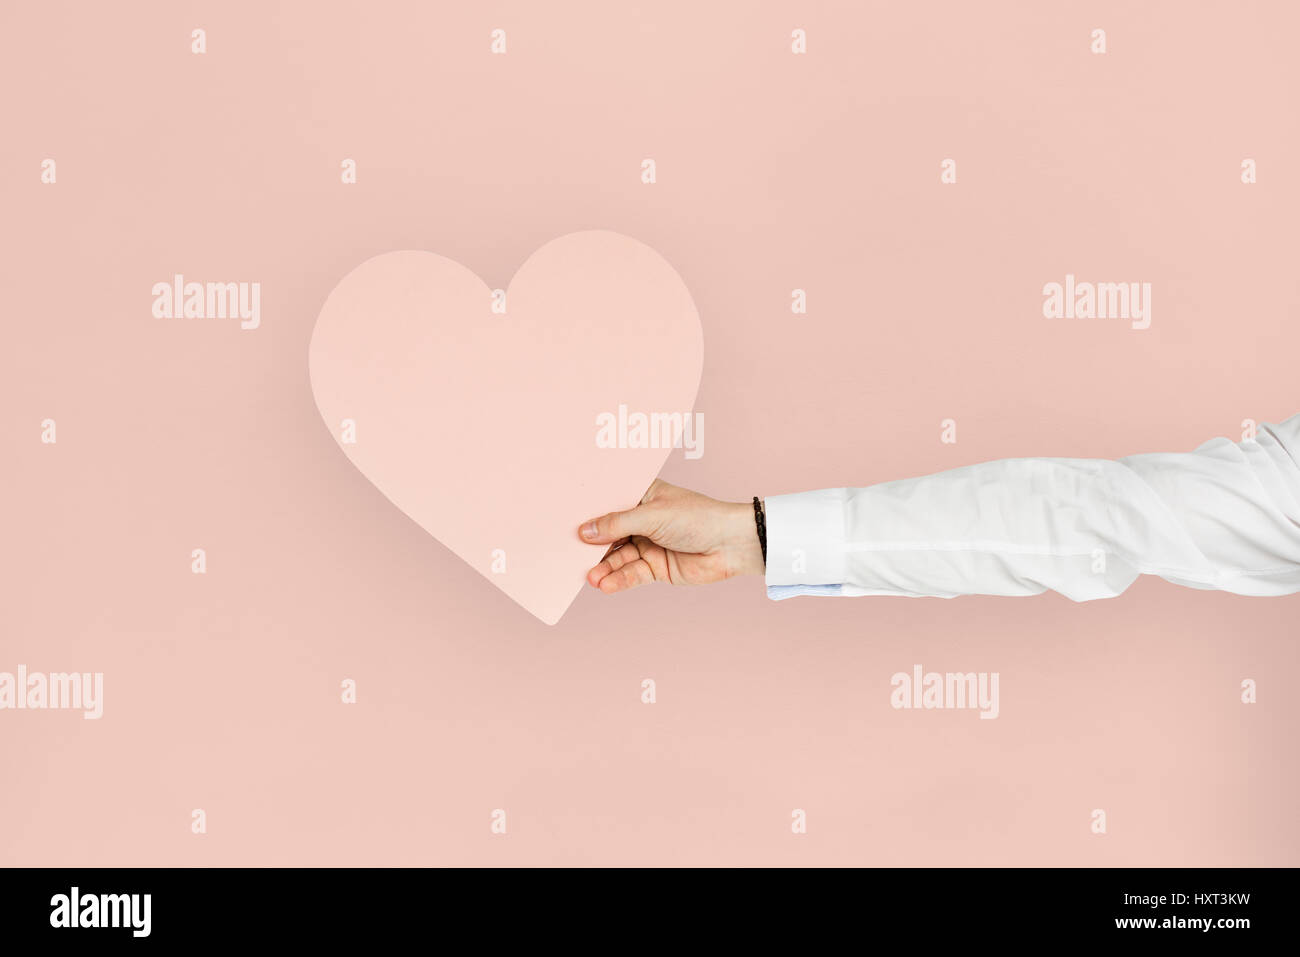 Heart Love Passion Healthy Romance Sweet Concept Stock Photo